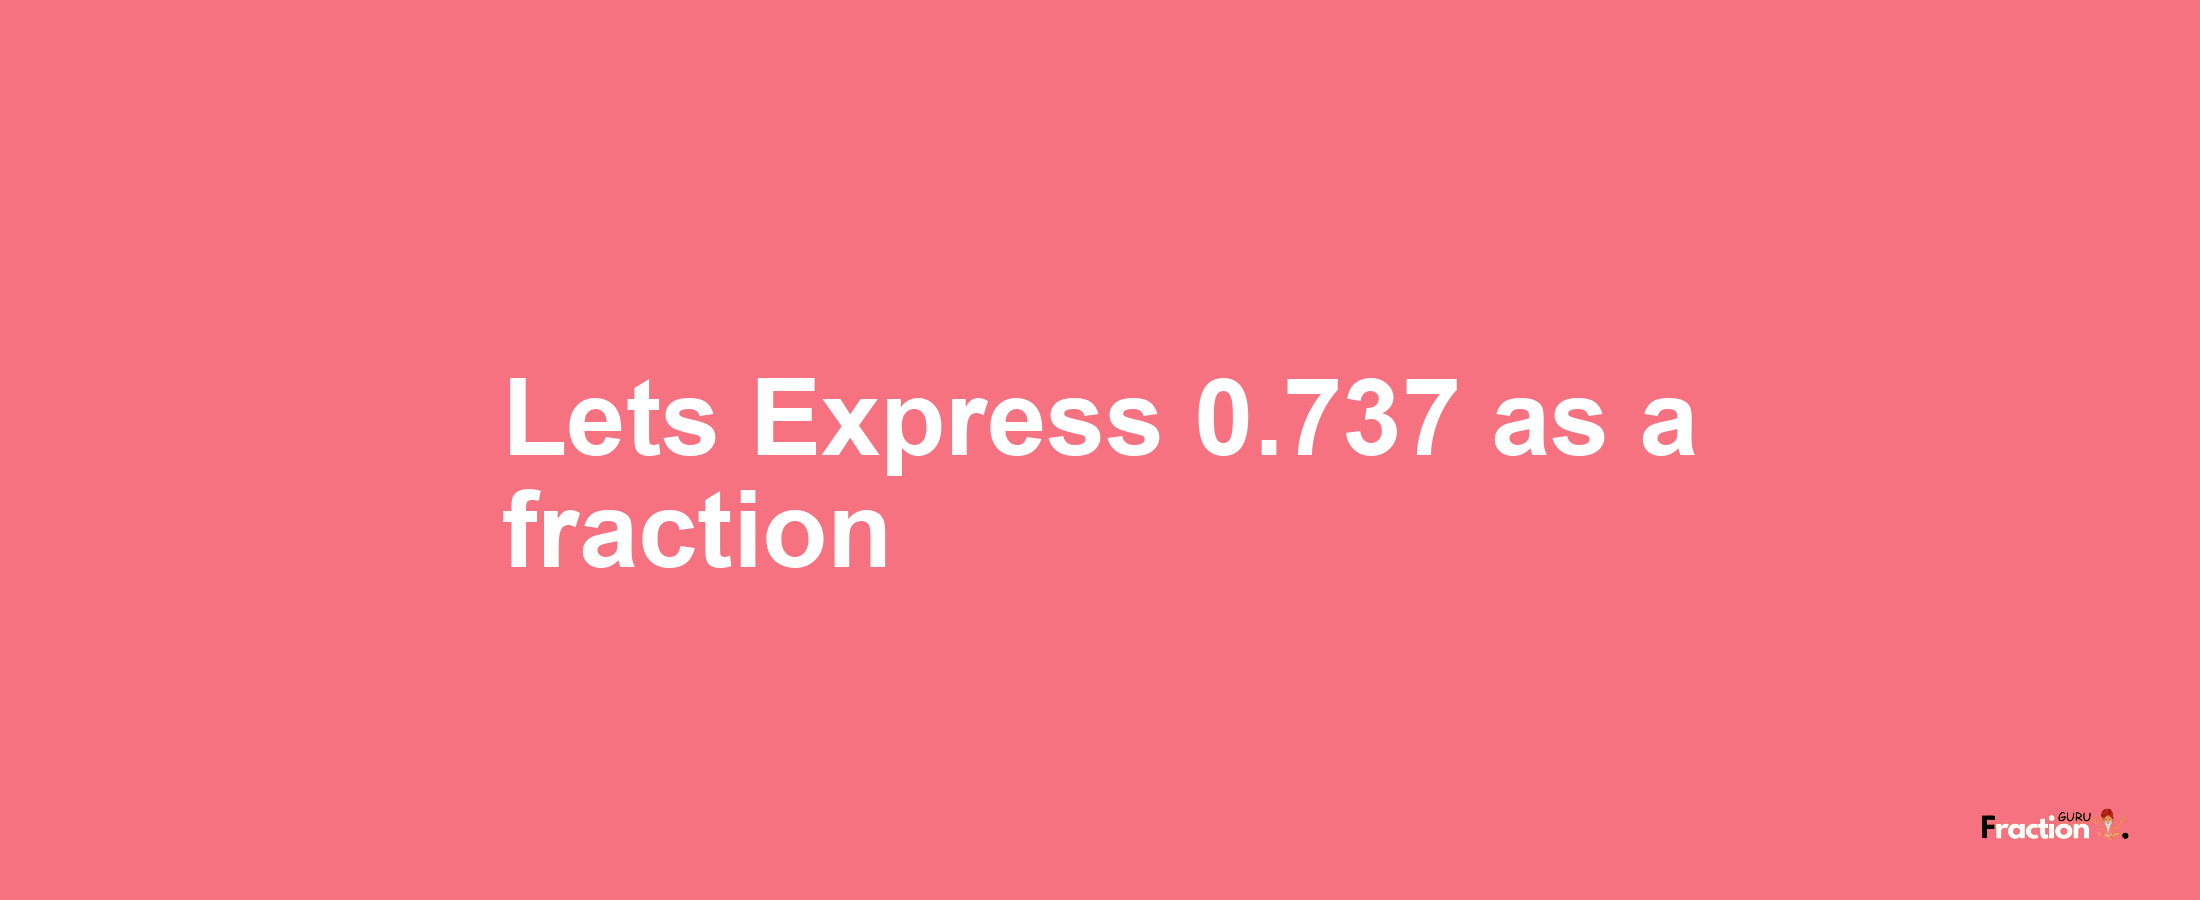 Lets Express 0.737 as afraction